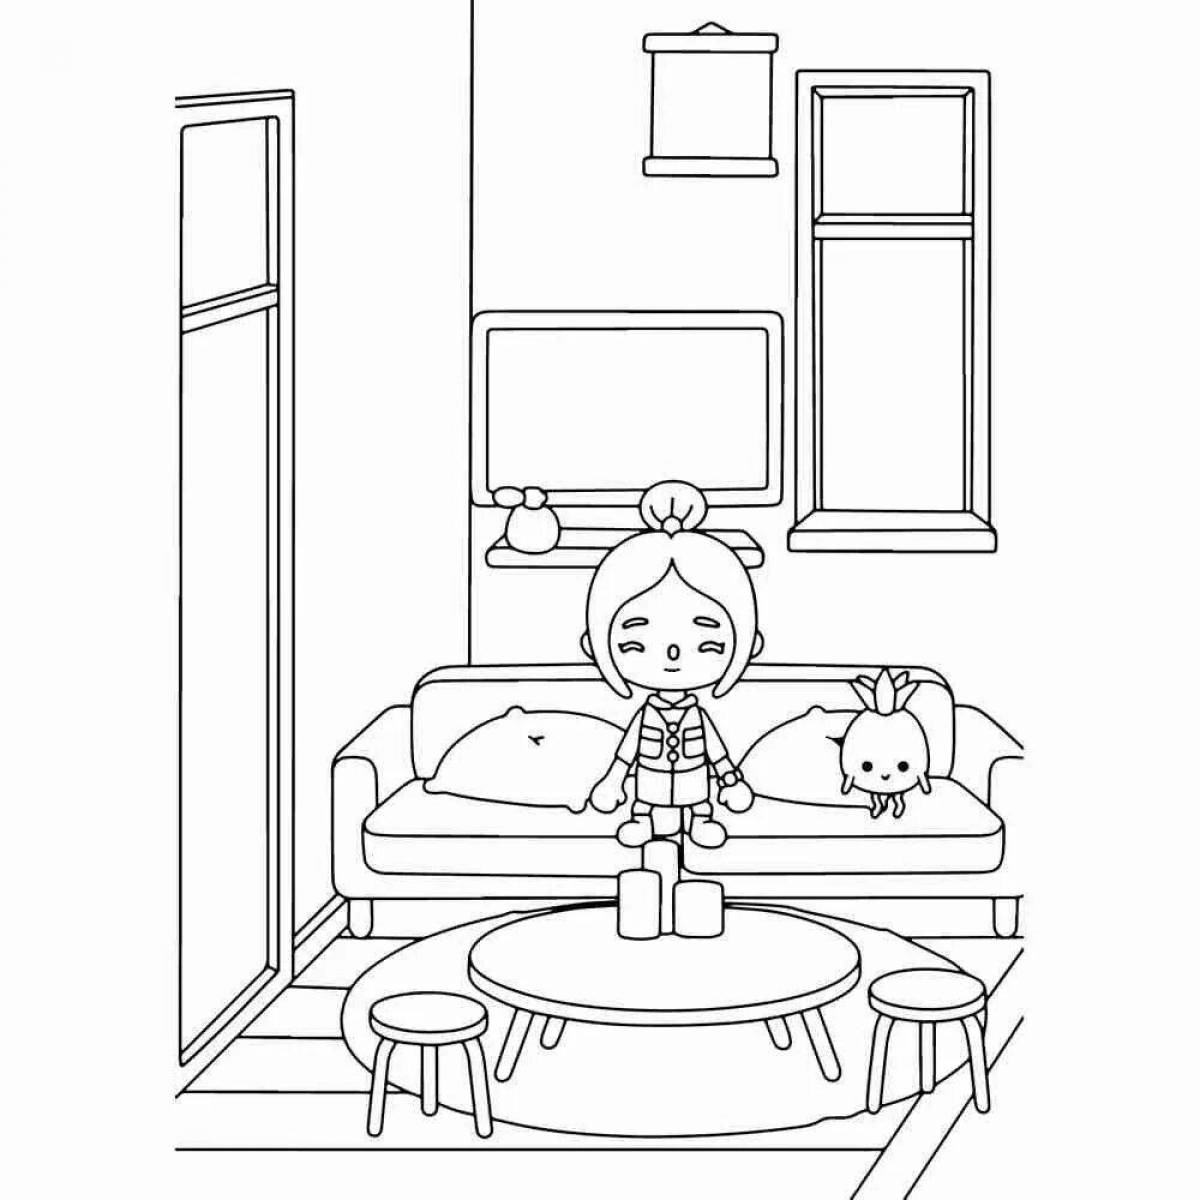 Colorful coloring page of the current bok shop